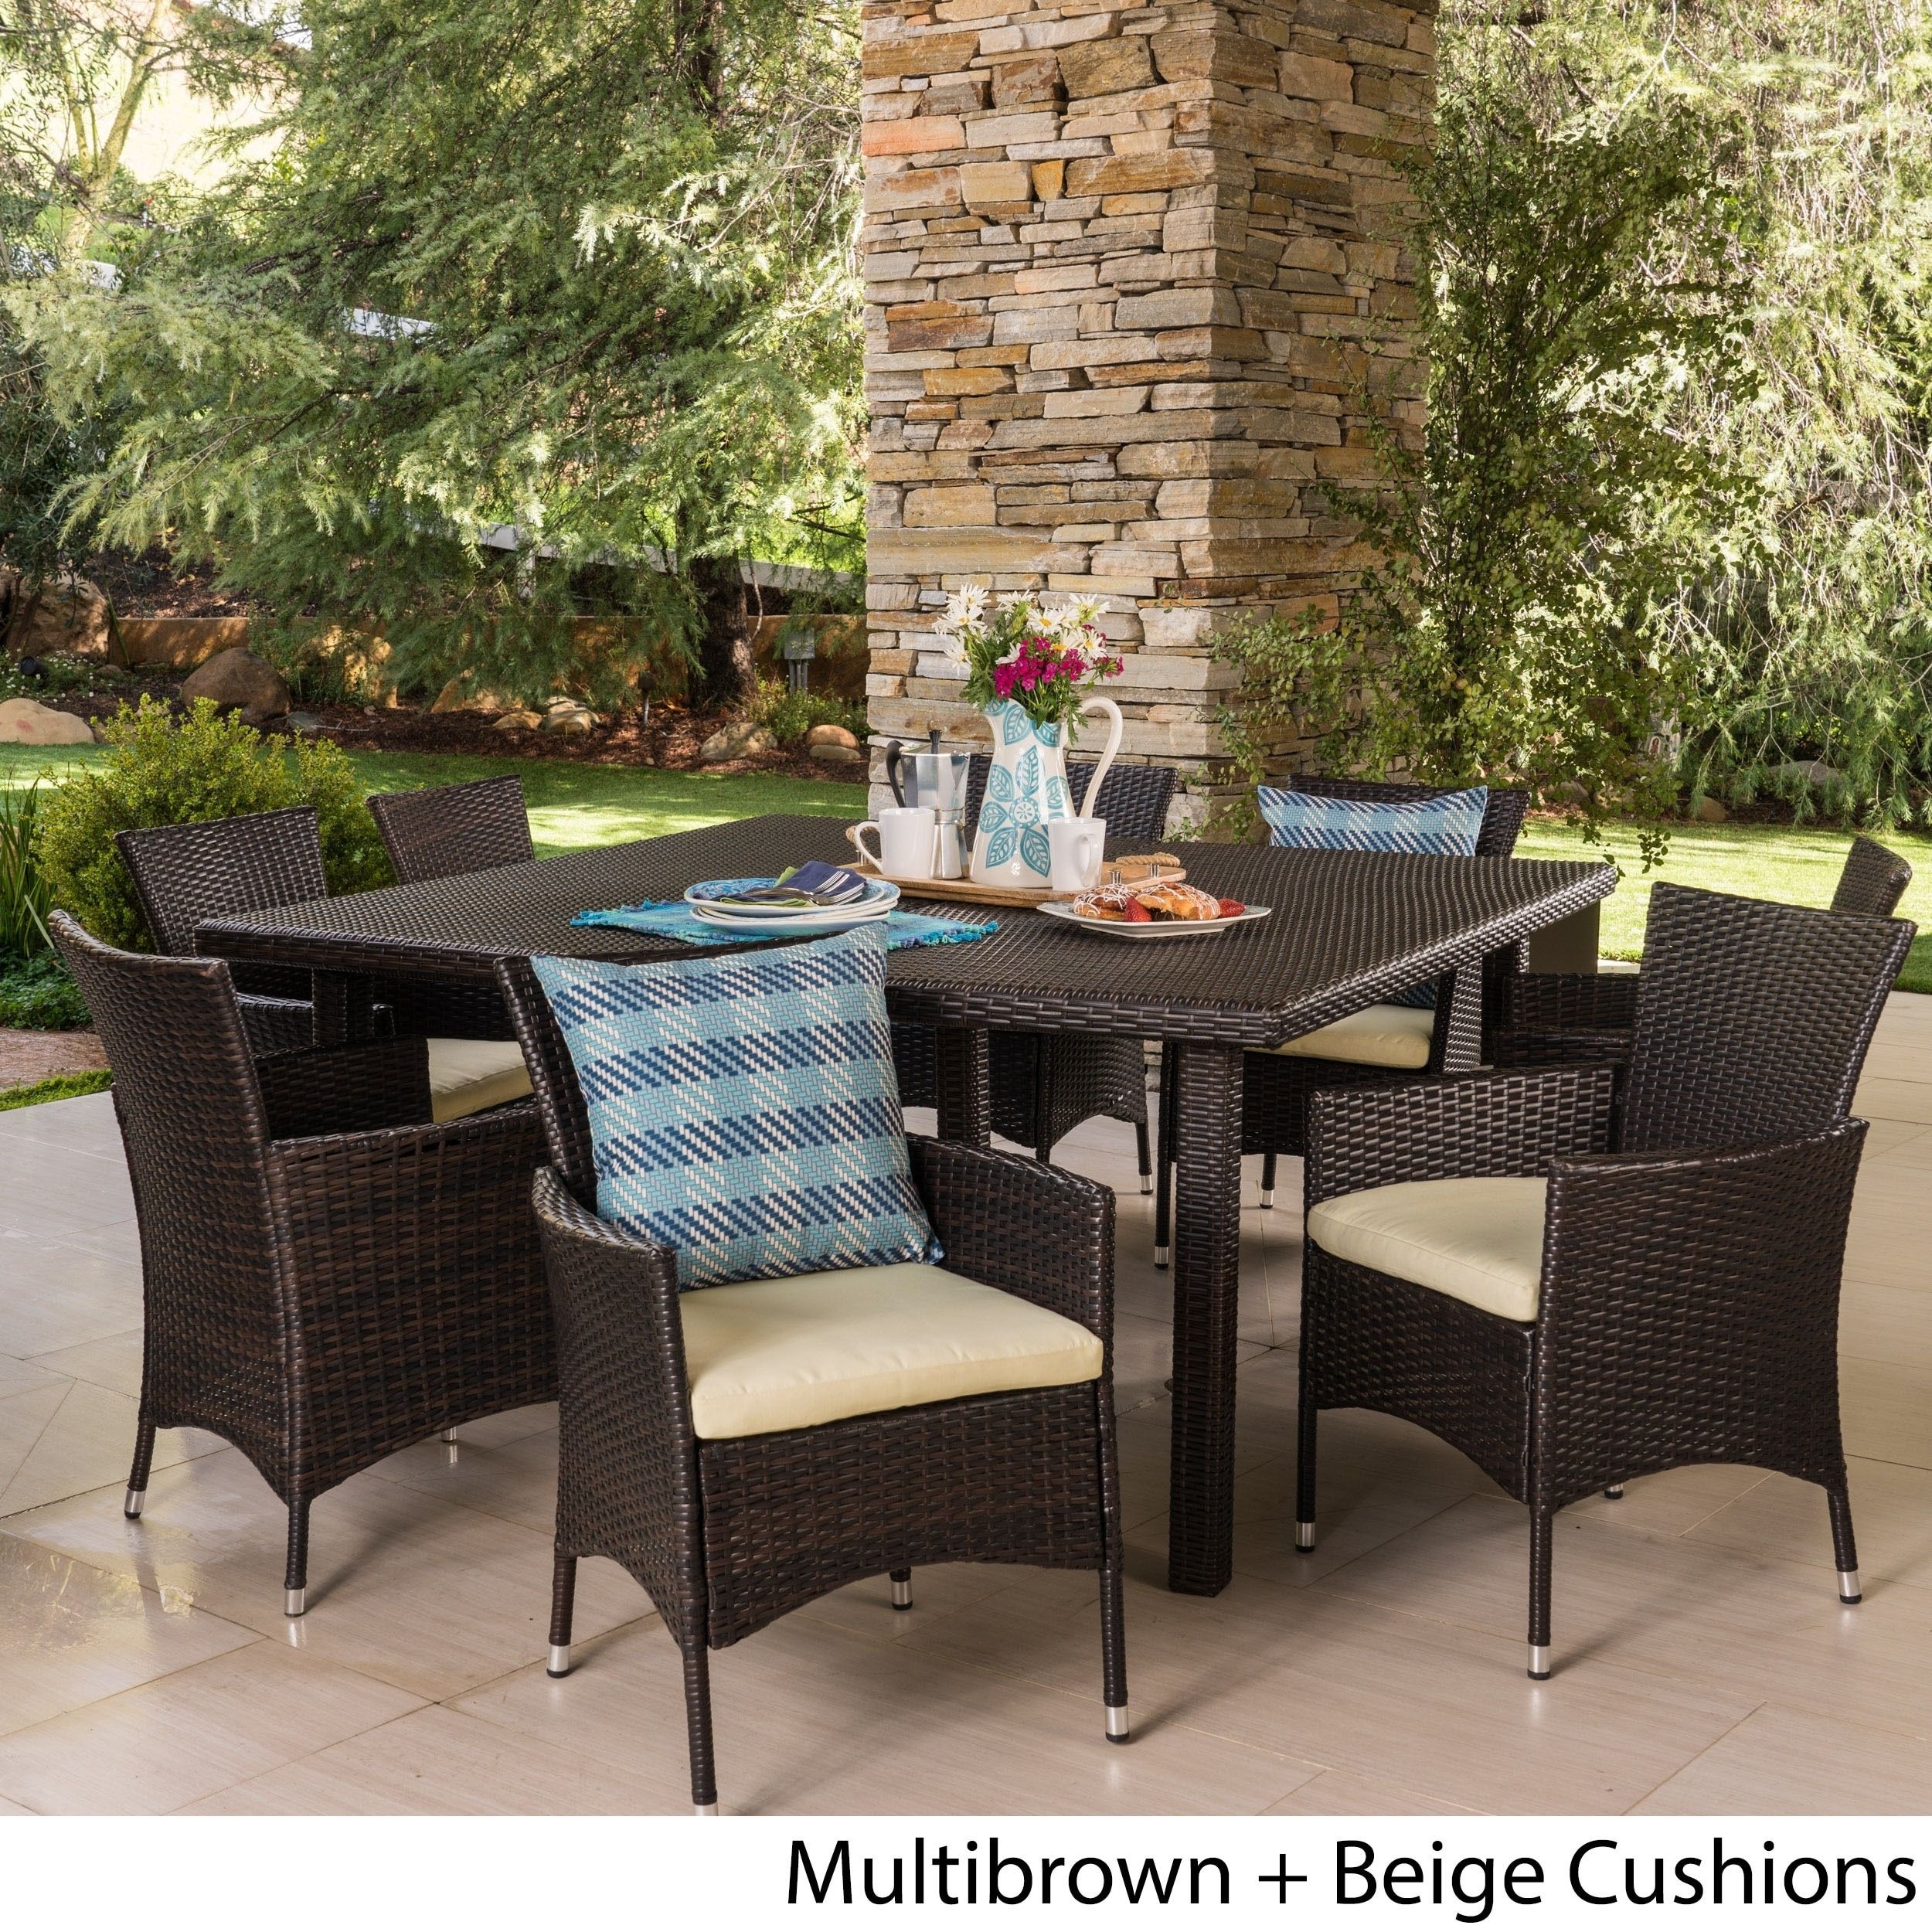 Christopher Knight Home Aristo Outdoor 9 Piece Square Wicker Dining Set Within 9 Piece Patio Dining Sets (View 1 of 15)